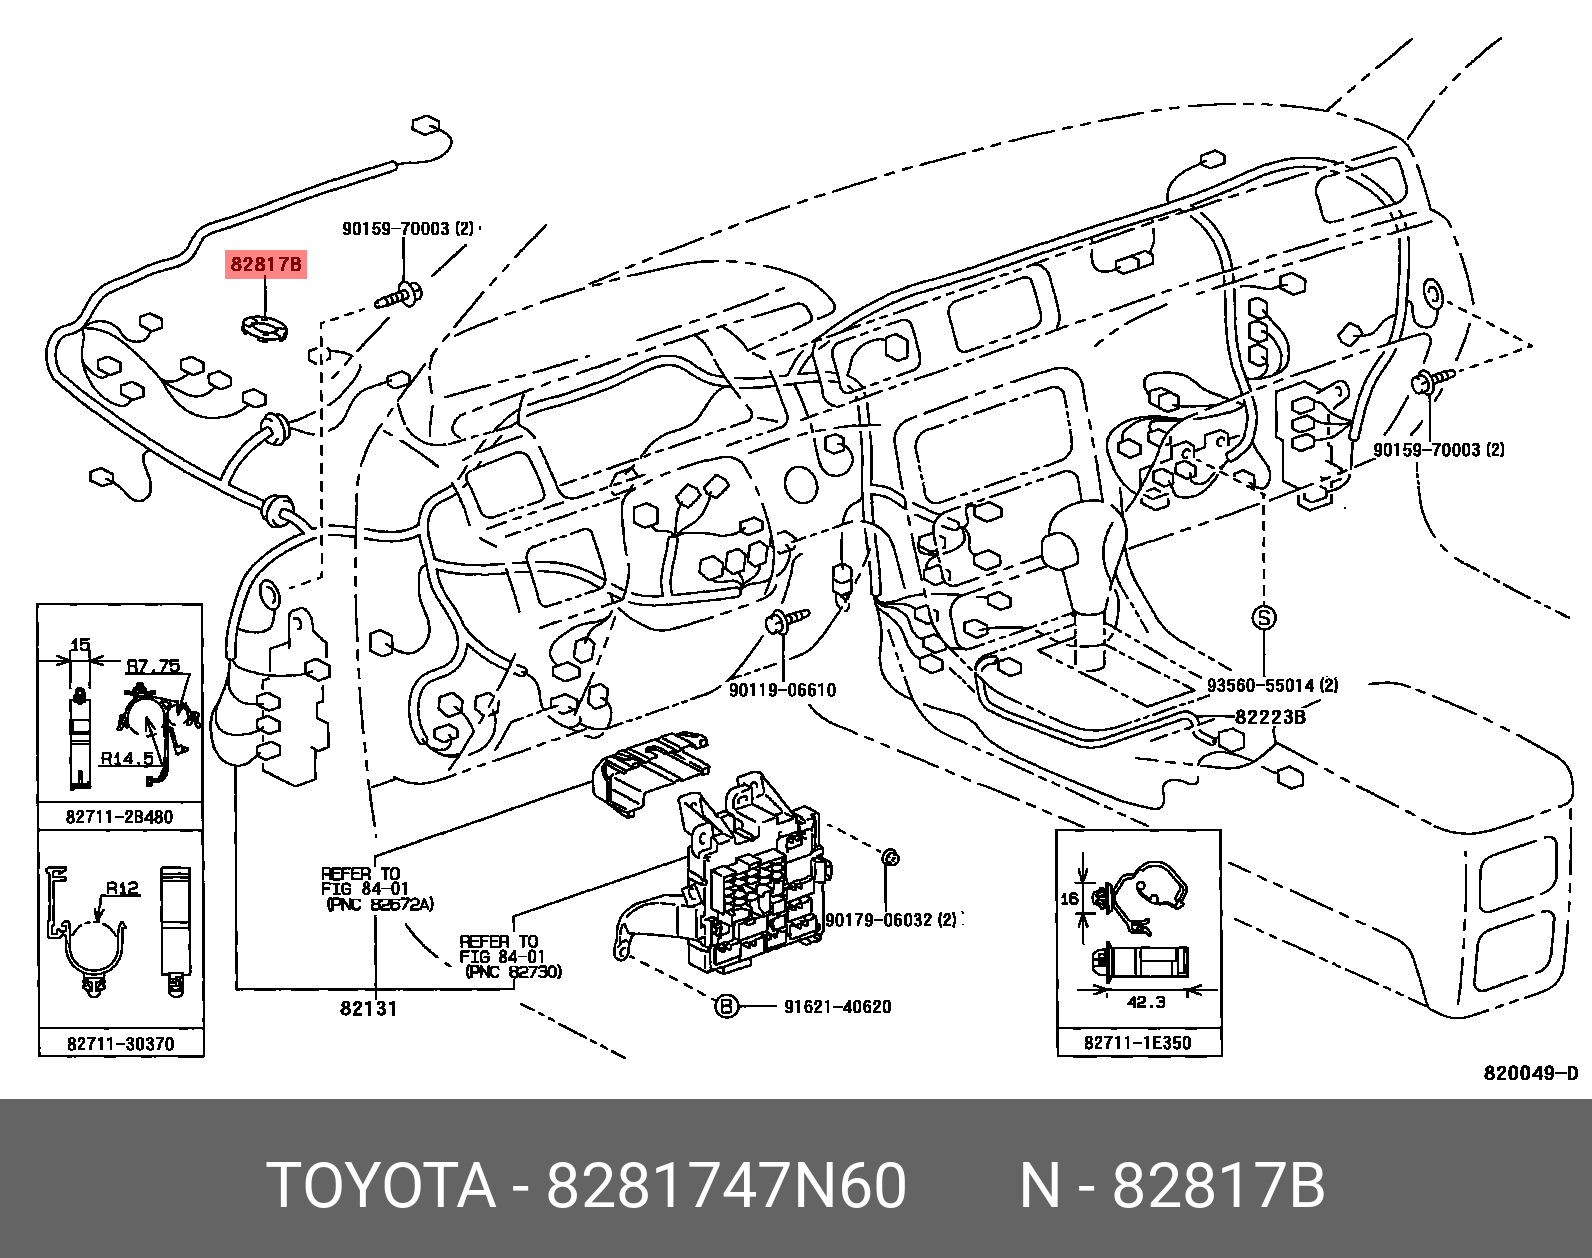 PRIUS 201511 -, PROTECTOR, WIRING HARNESS, NO.3